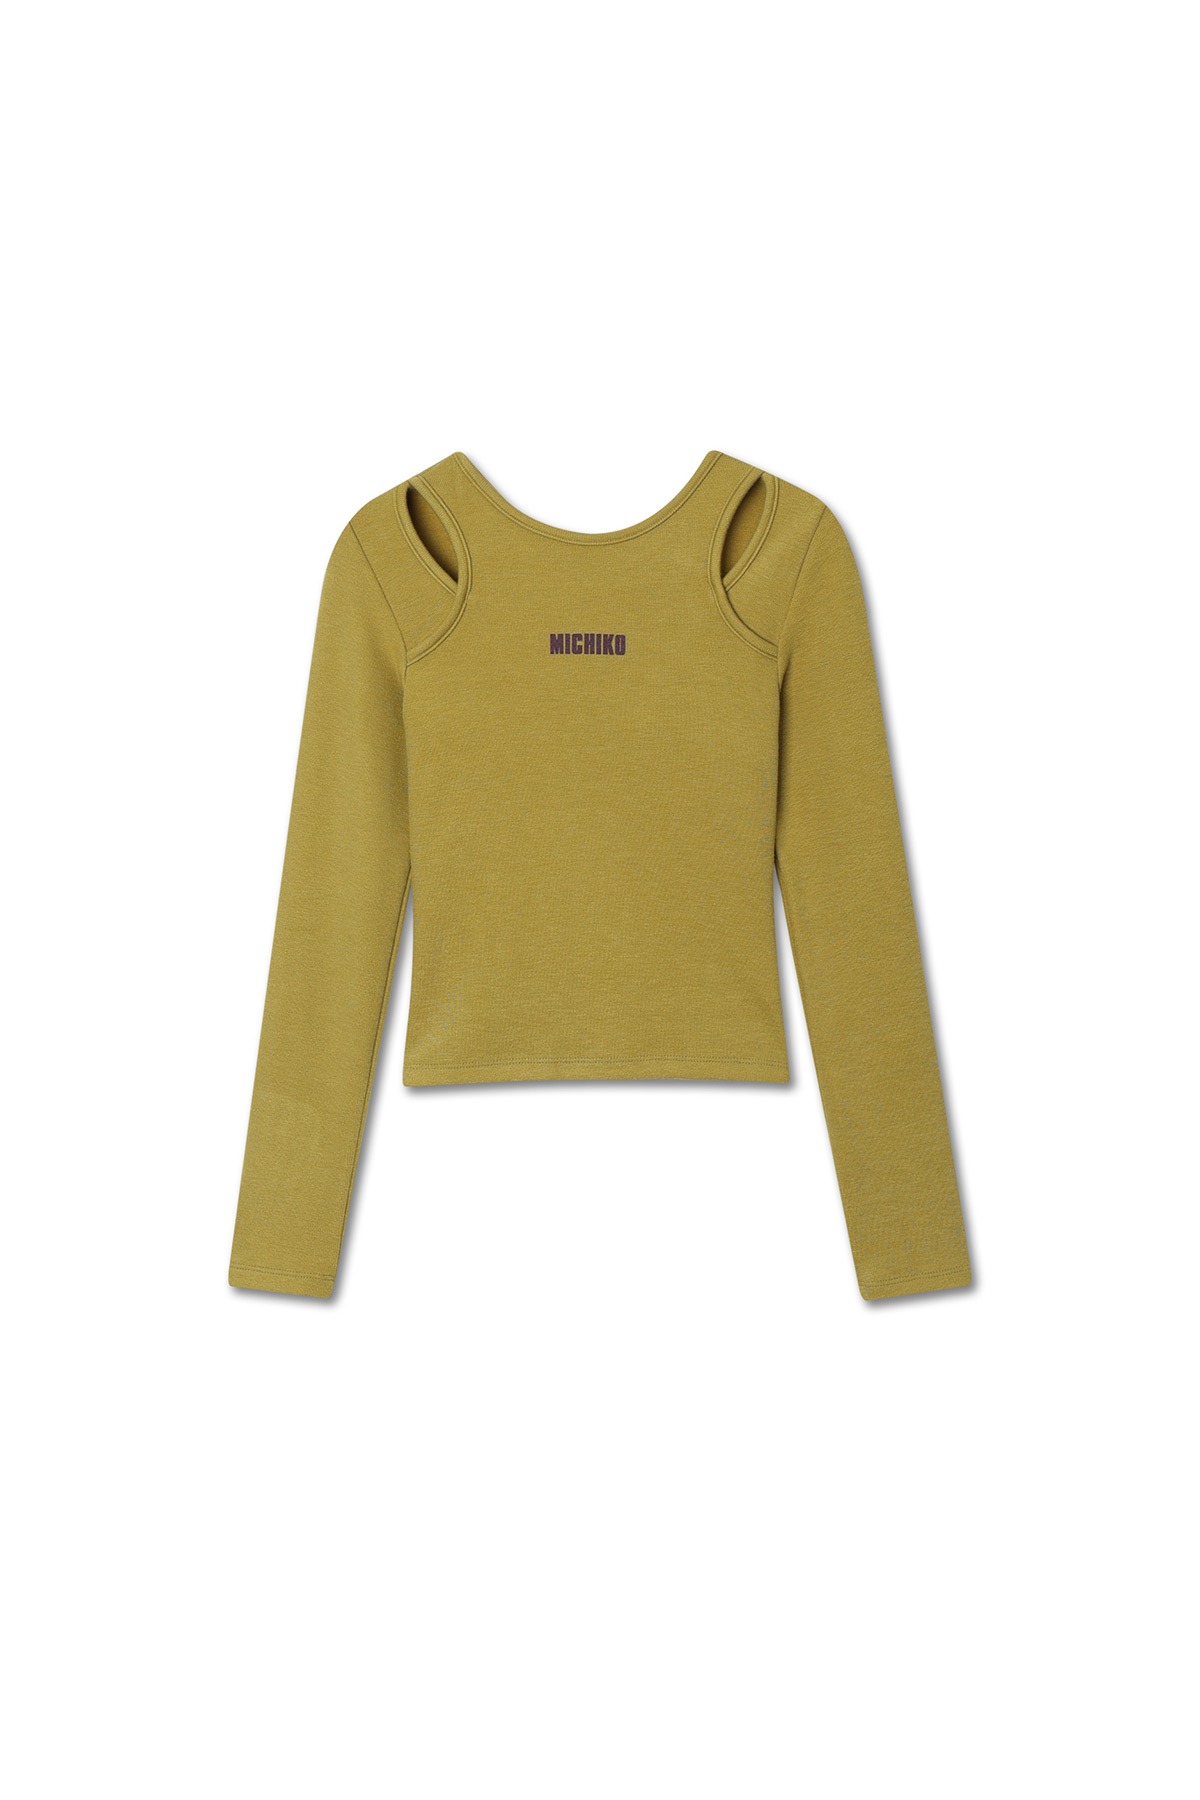 REVERSIBLE CUT-OUT TOP MUSTARD